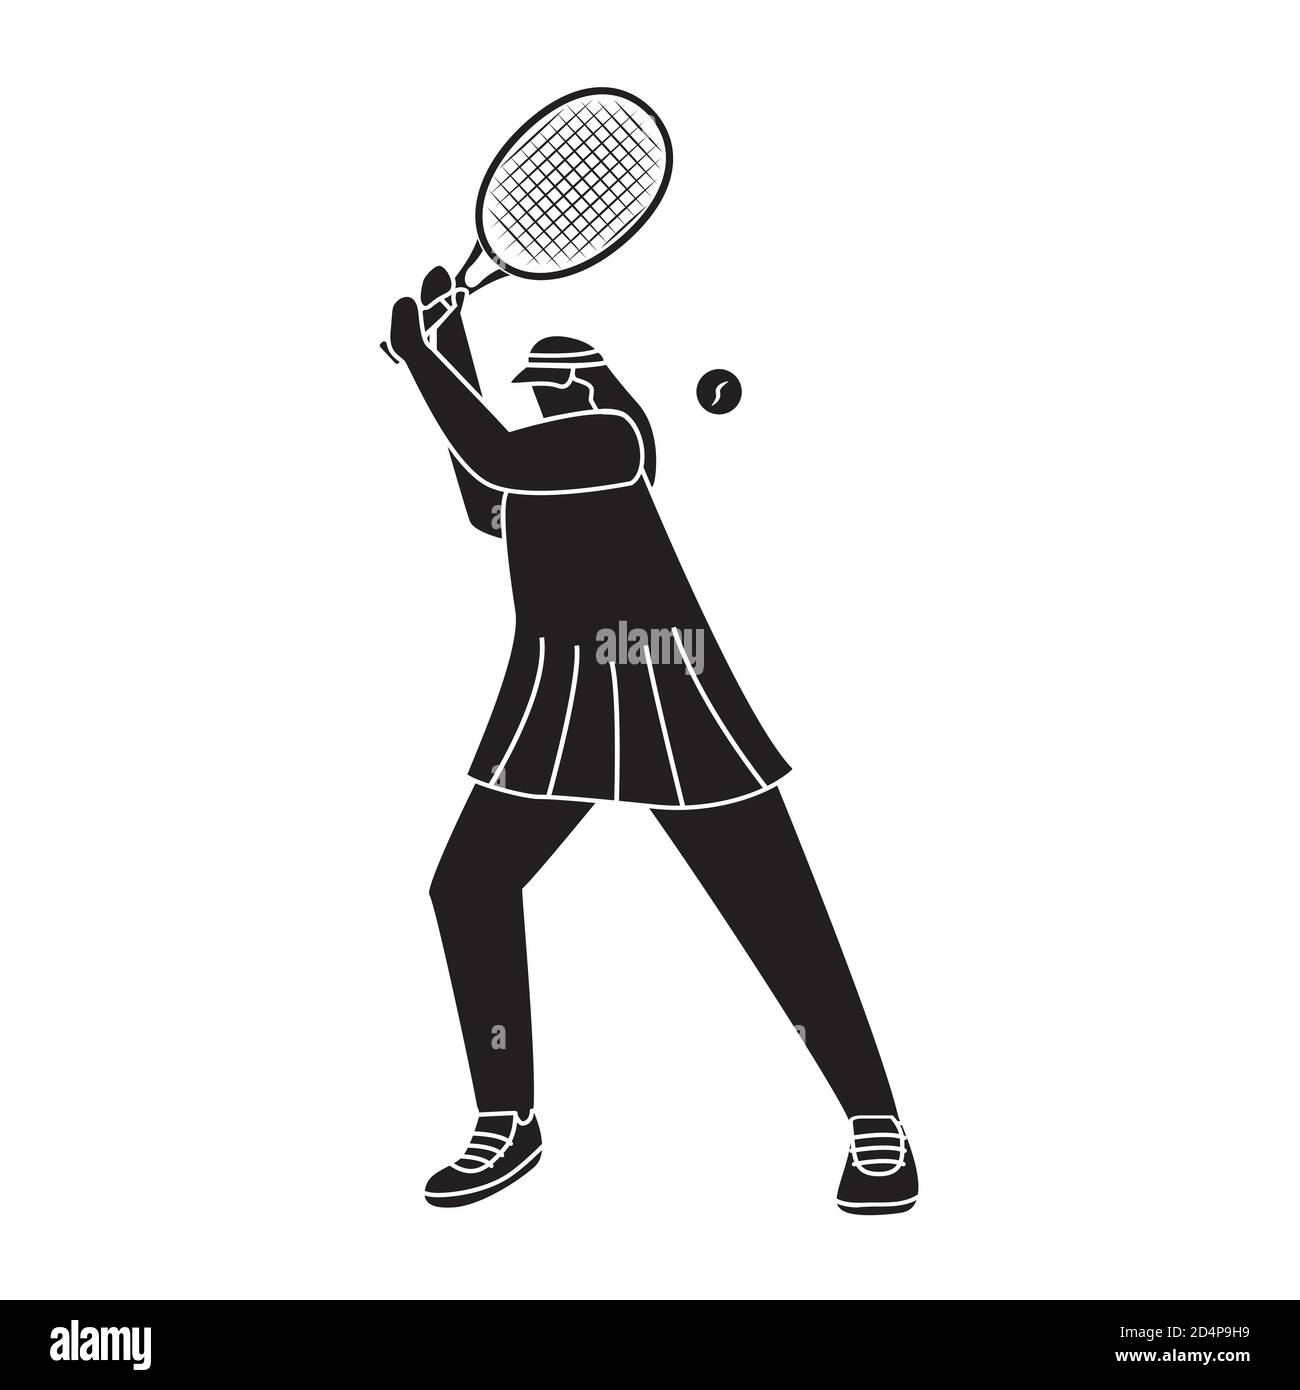 Woman playing tennis.Young girl play a sport game in silhouette. Stock Vector